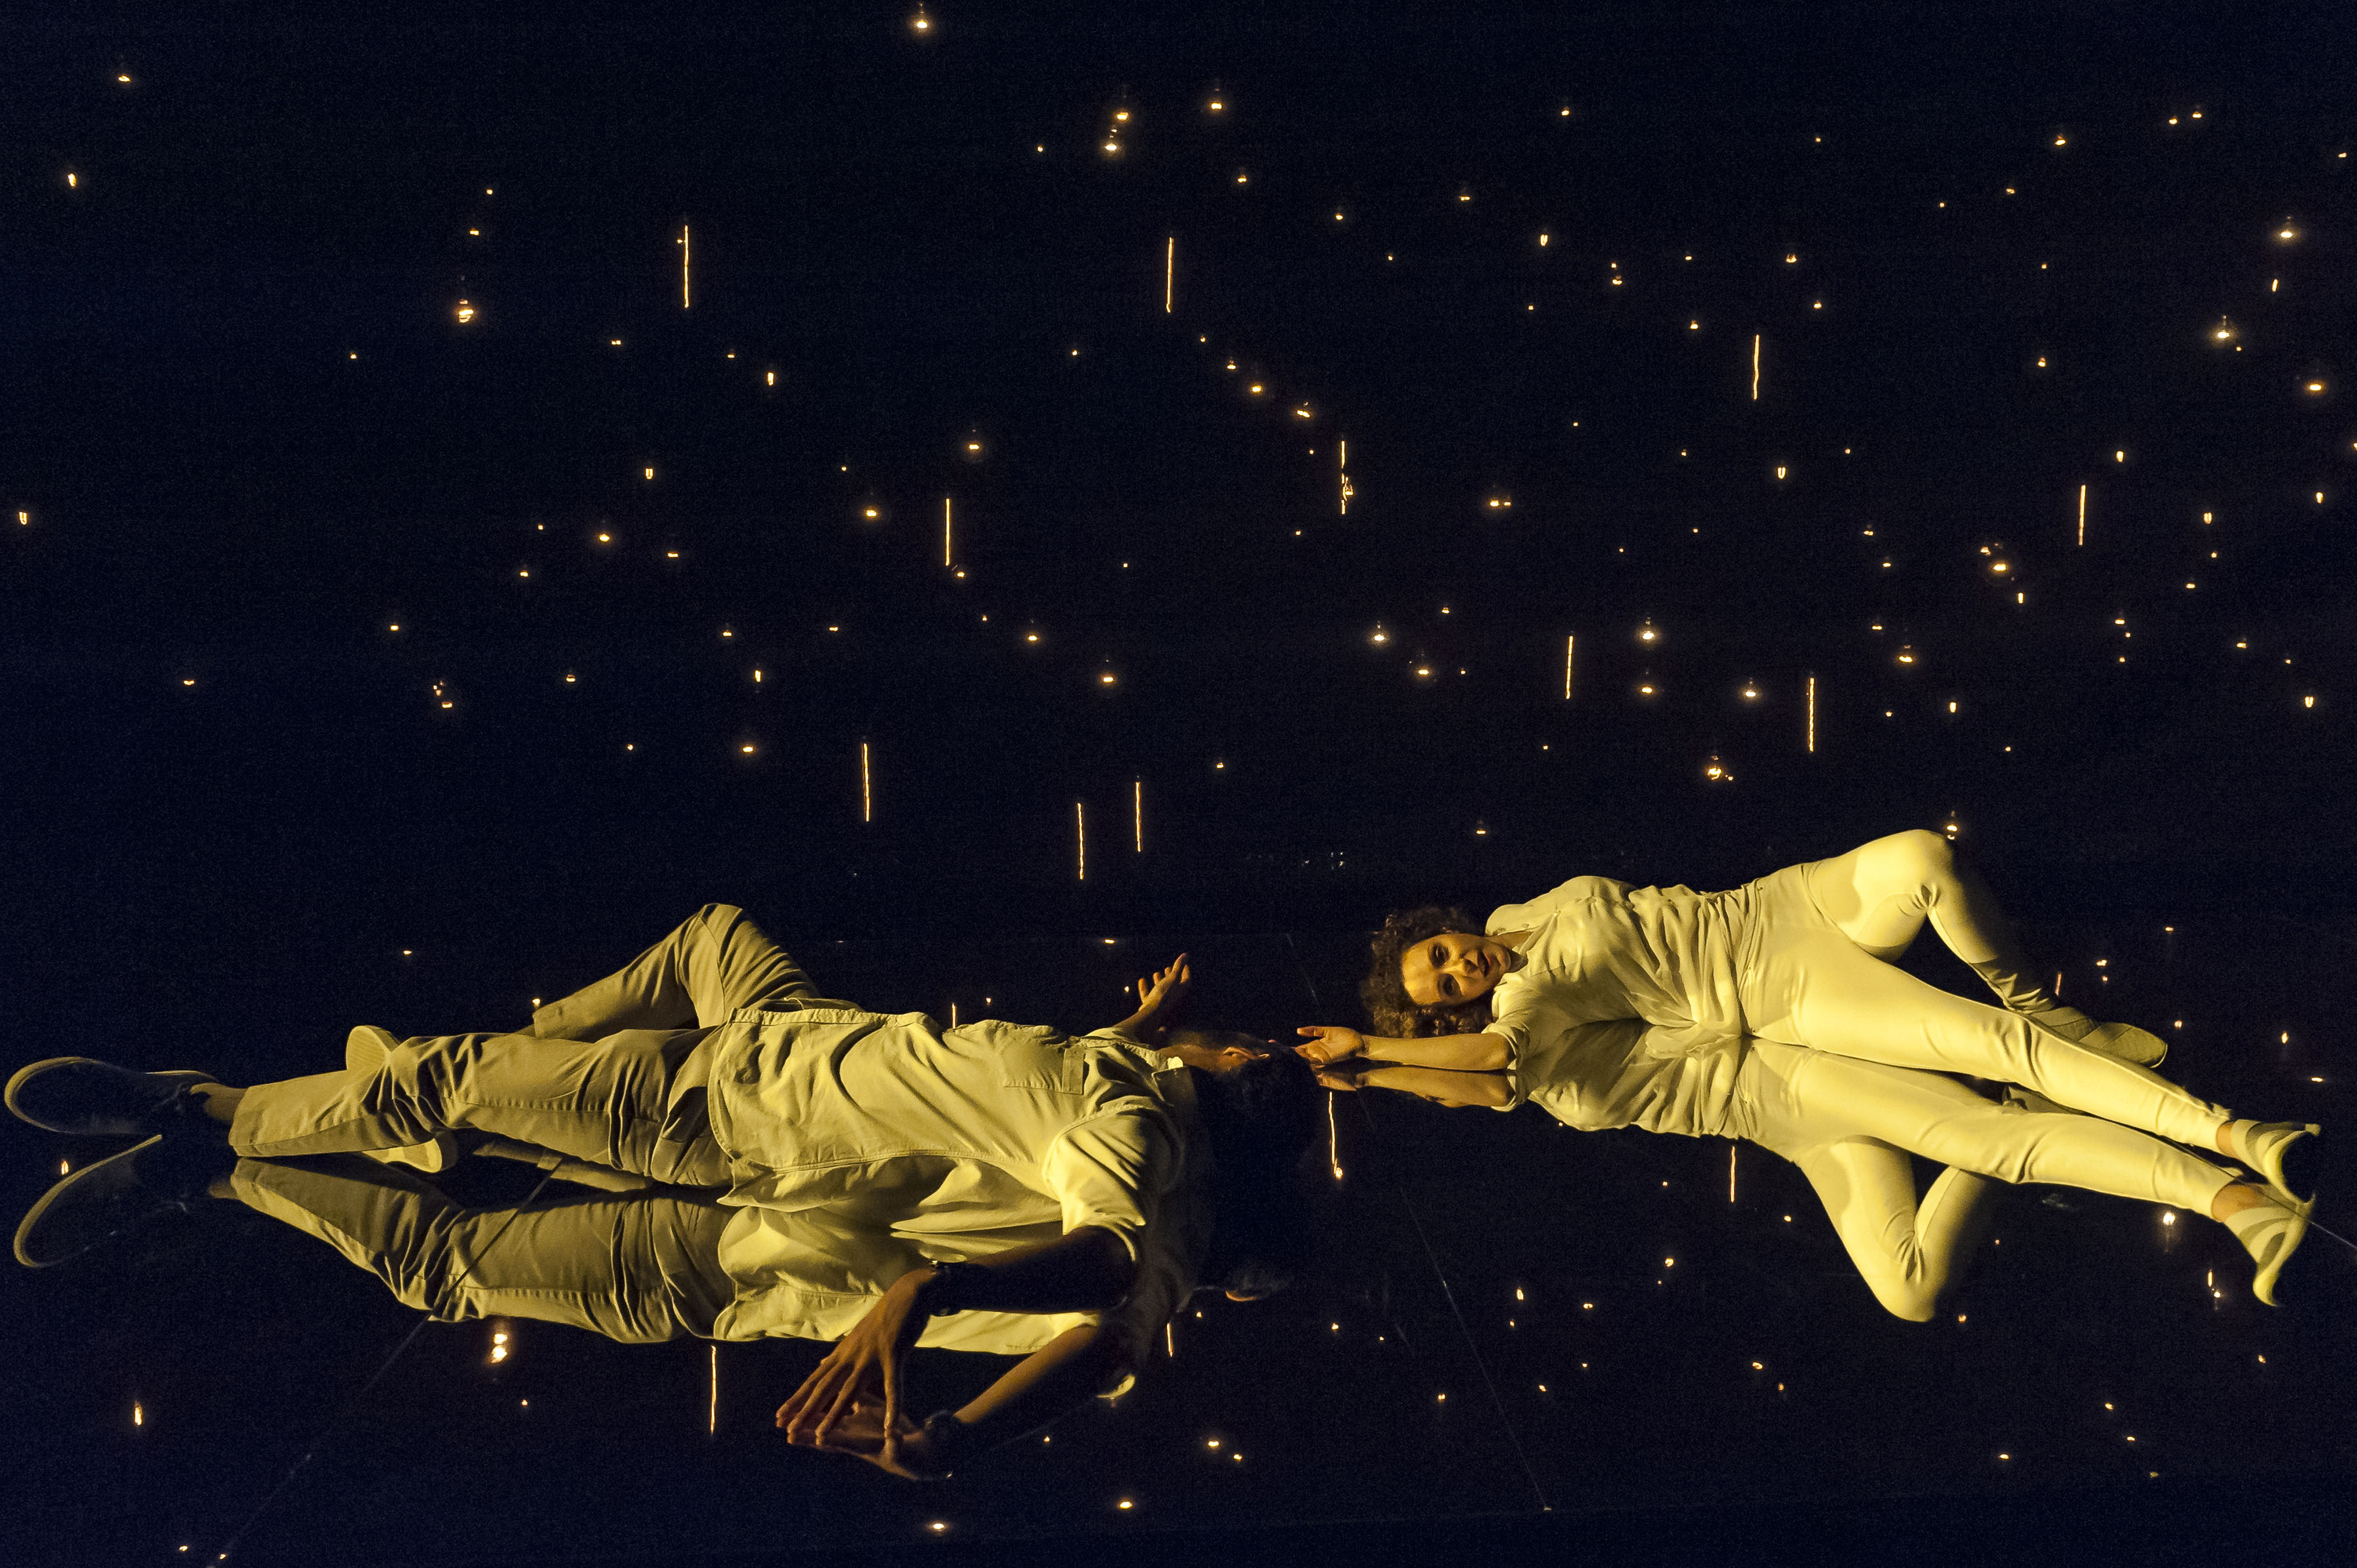 Nael Nacer & Marianna Bassham in CONSTELLATIONS. Photo: A.R. Sinclair Photography.